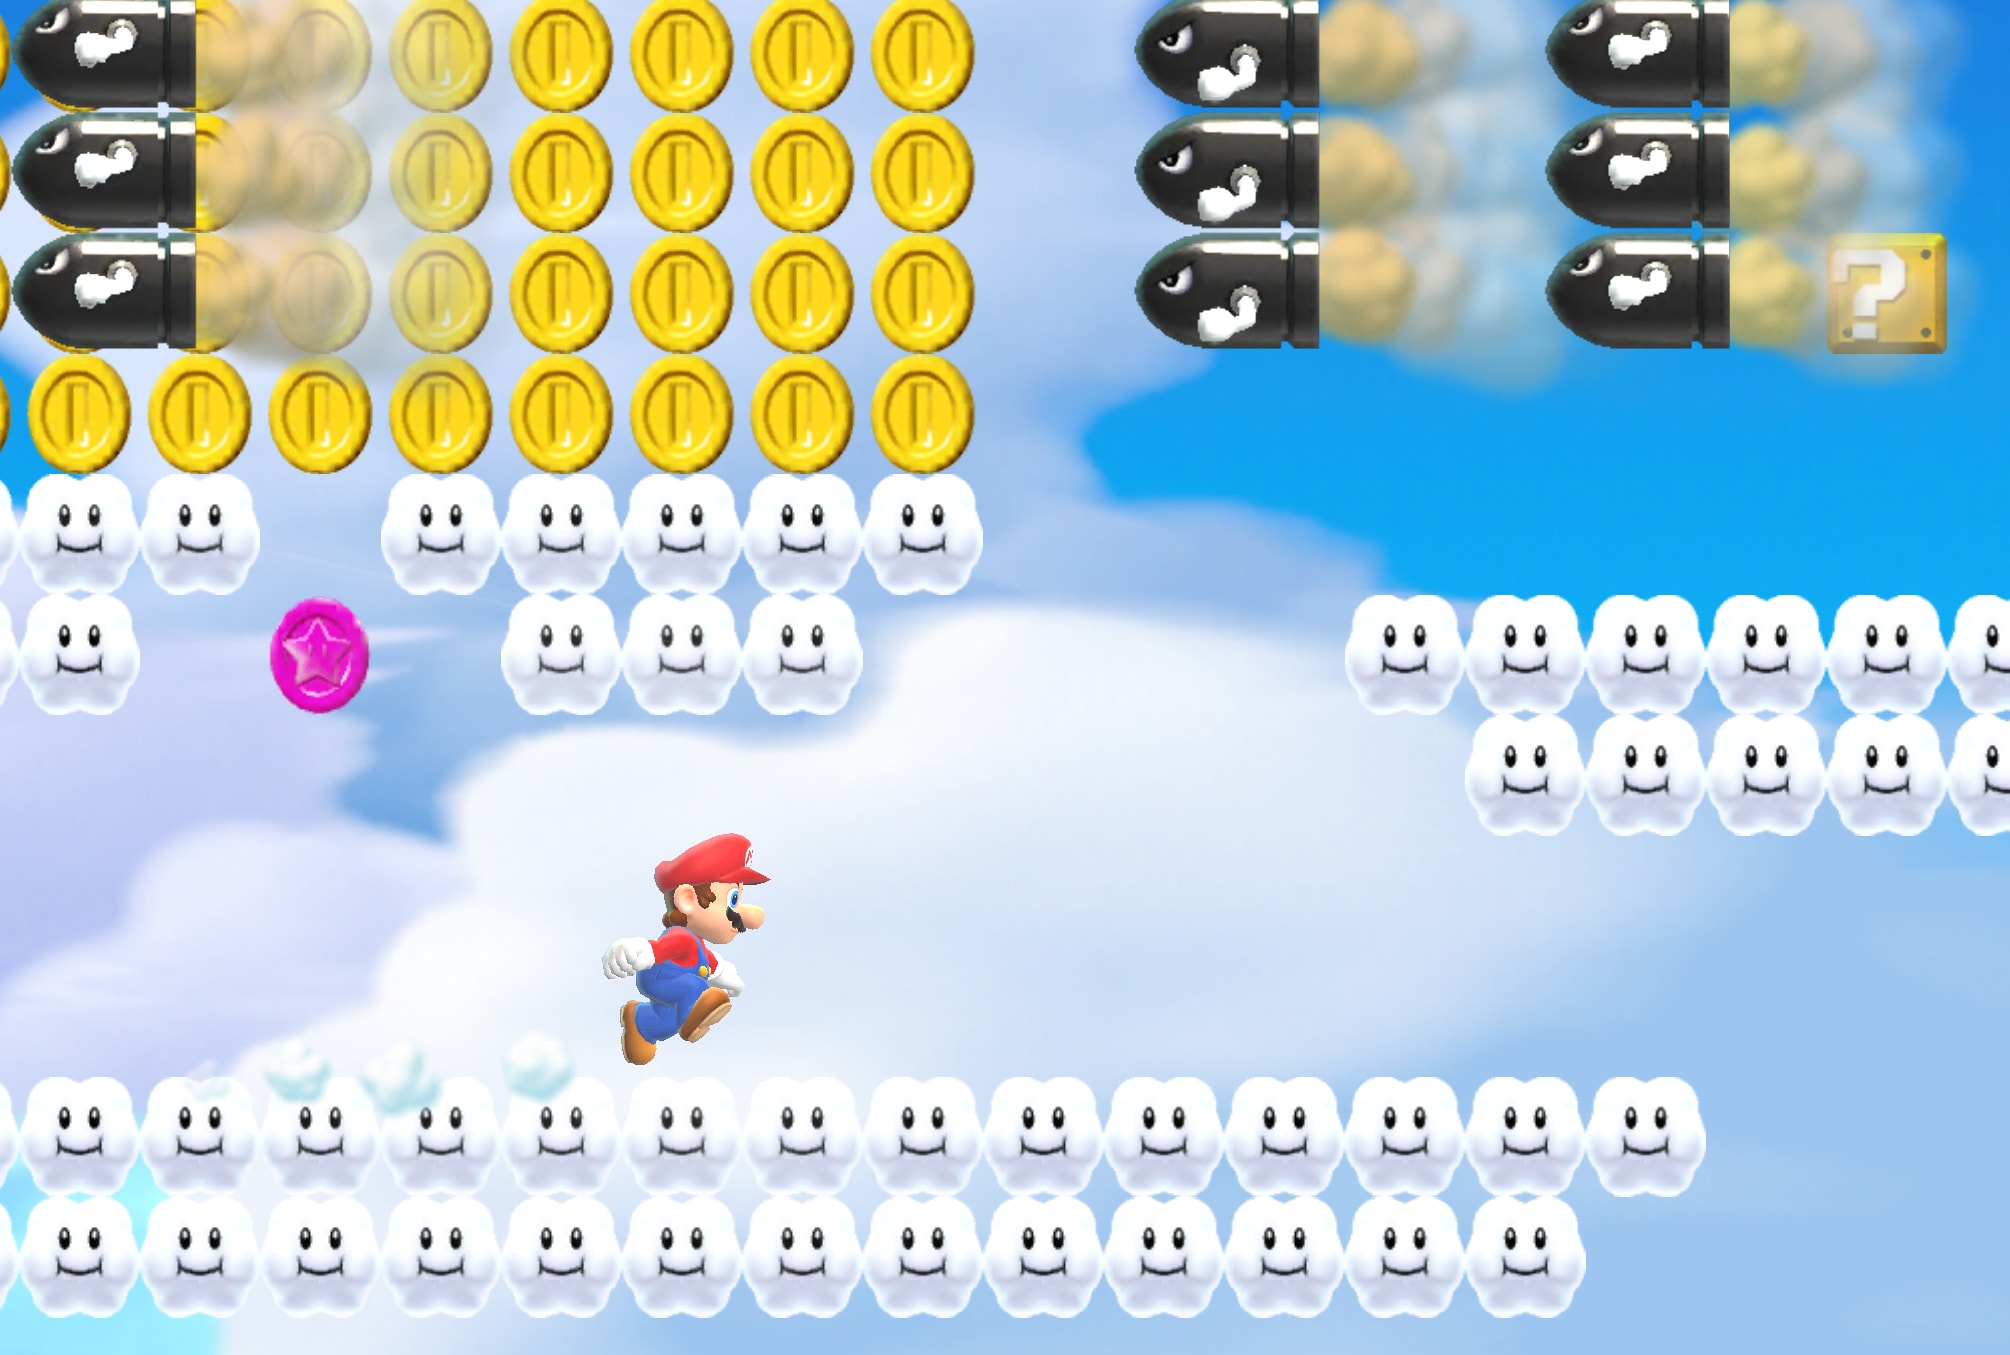 7 Super Mario Run tips you need to know